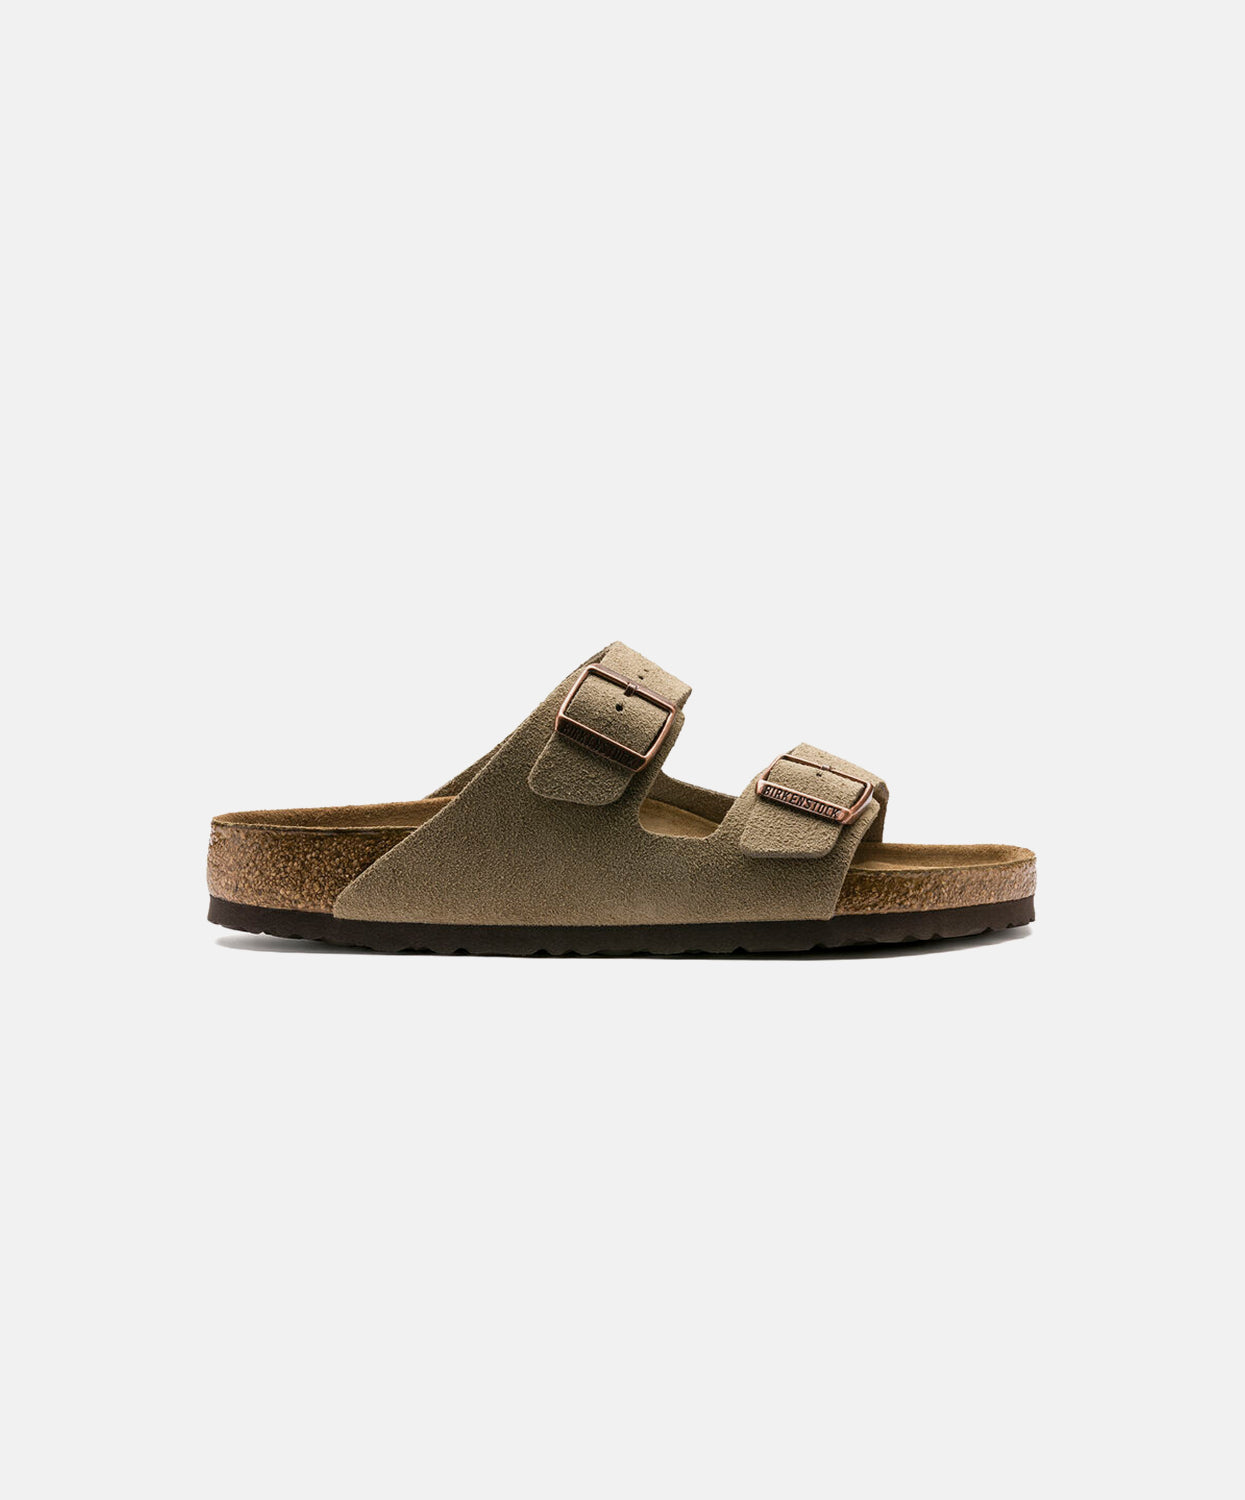 Arizona Soft Footbed Oiled Leather Tobacco Brown | BIRKENSTOCK